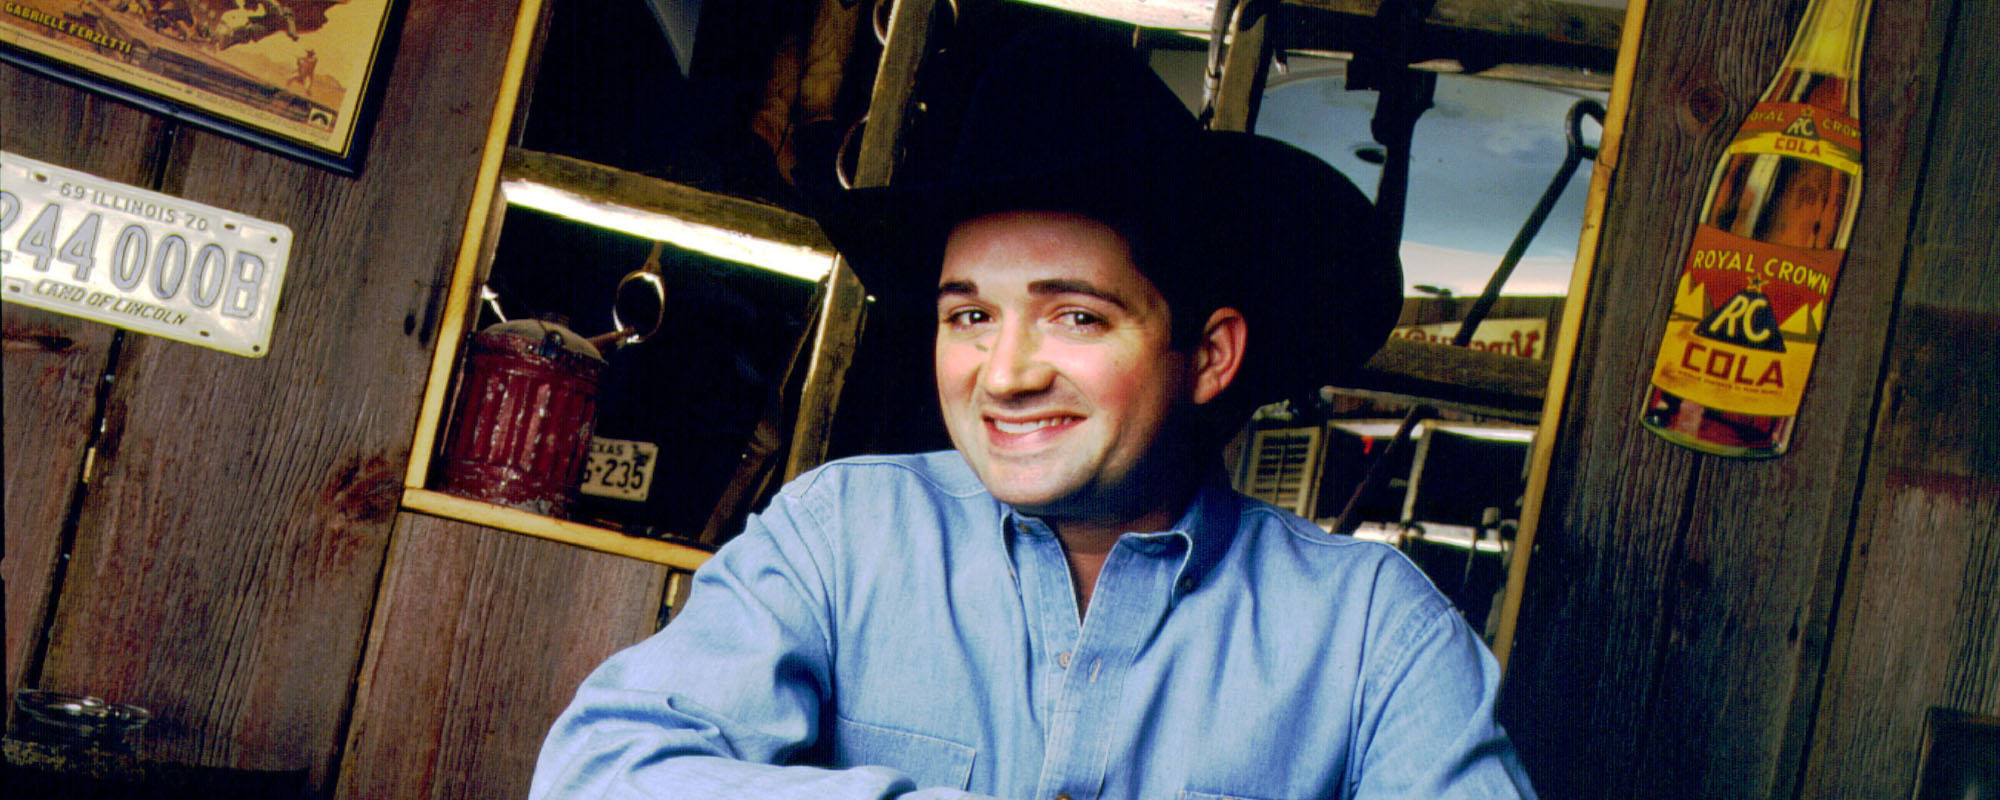 Where Are They Now?: “Watermelon Crawl” Hitmaker Tracy Byrd